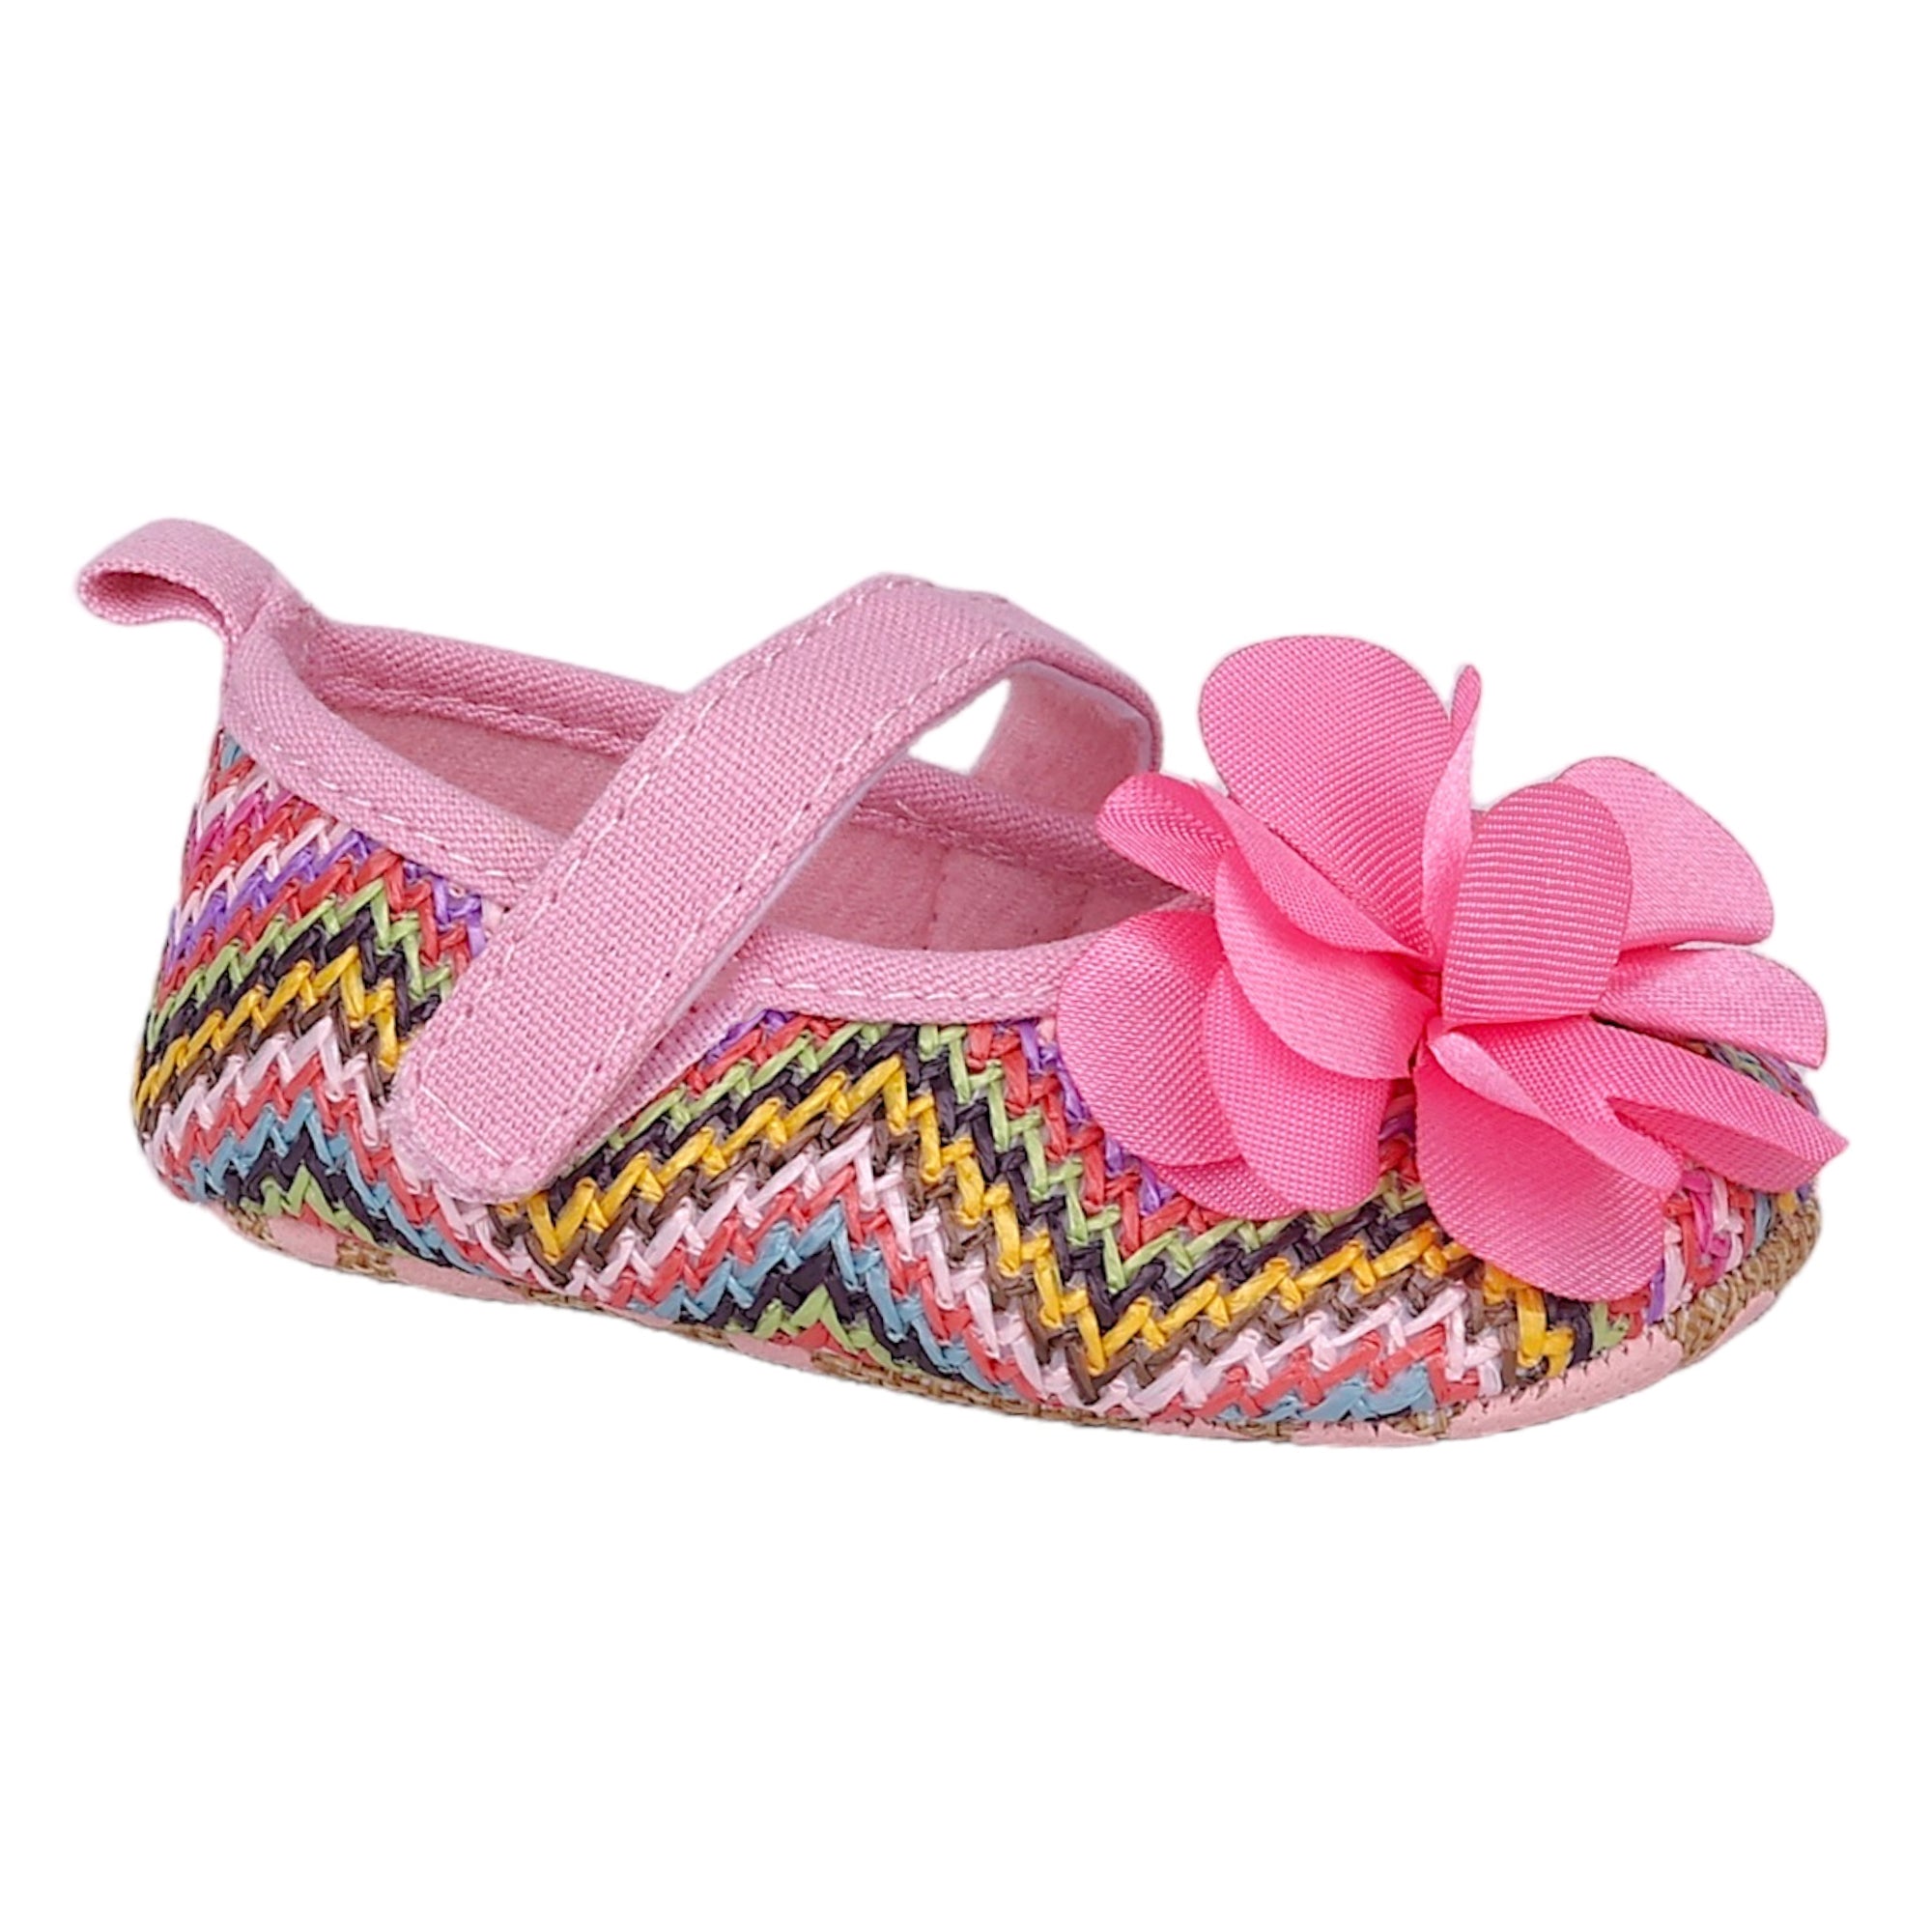 Baby Moo Embellished Petals Colourful Woven Anti-Skid Ballerina Booties - Pink